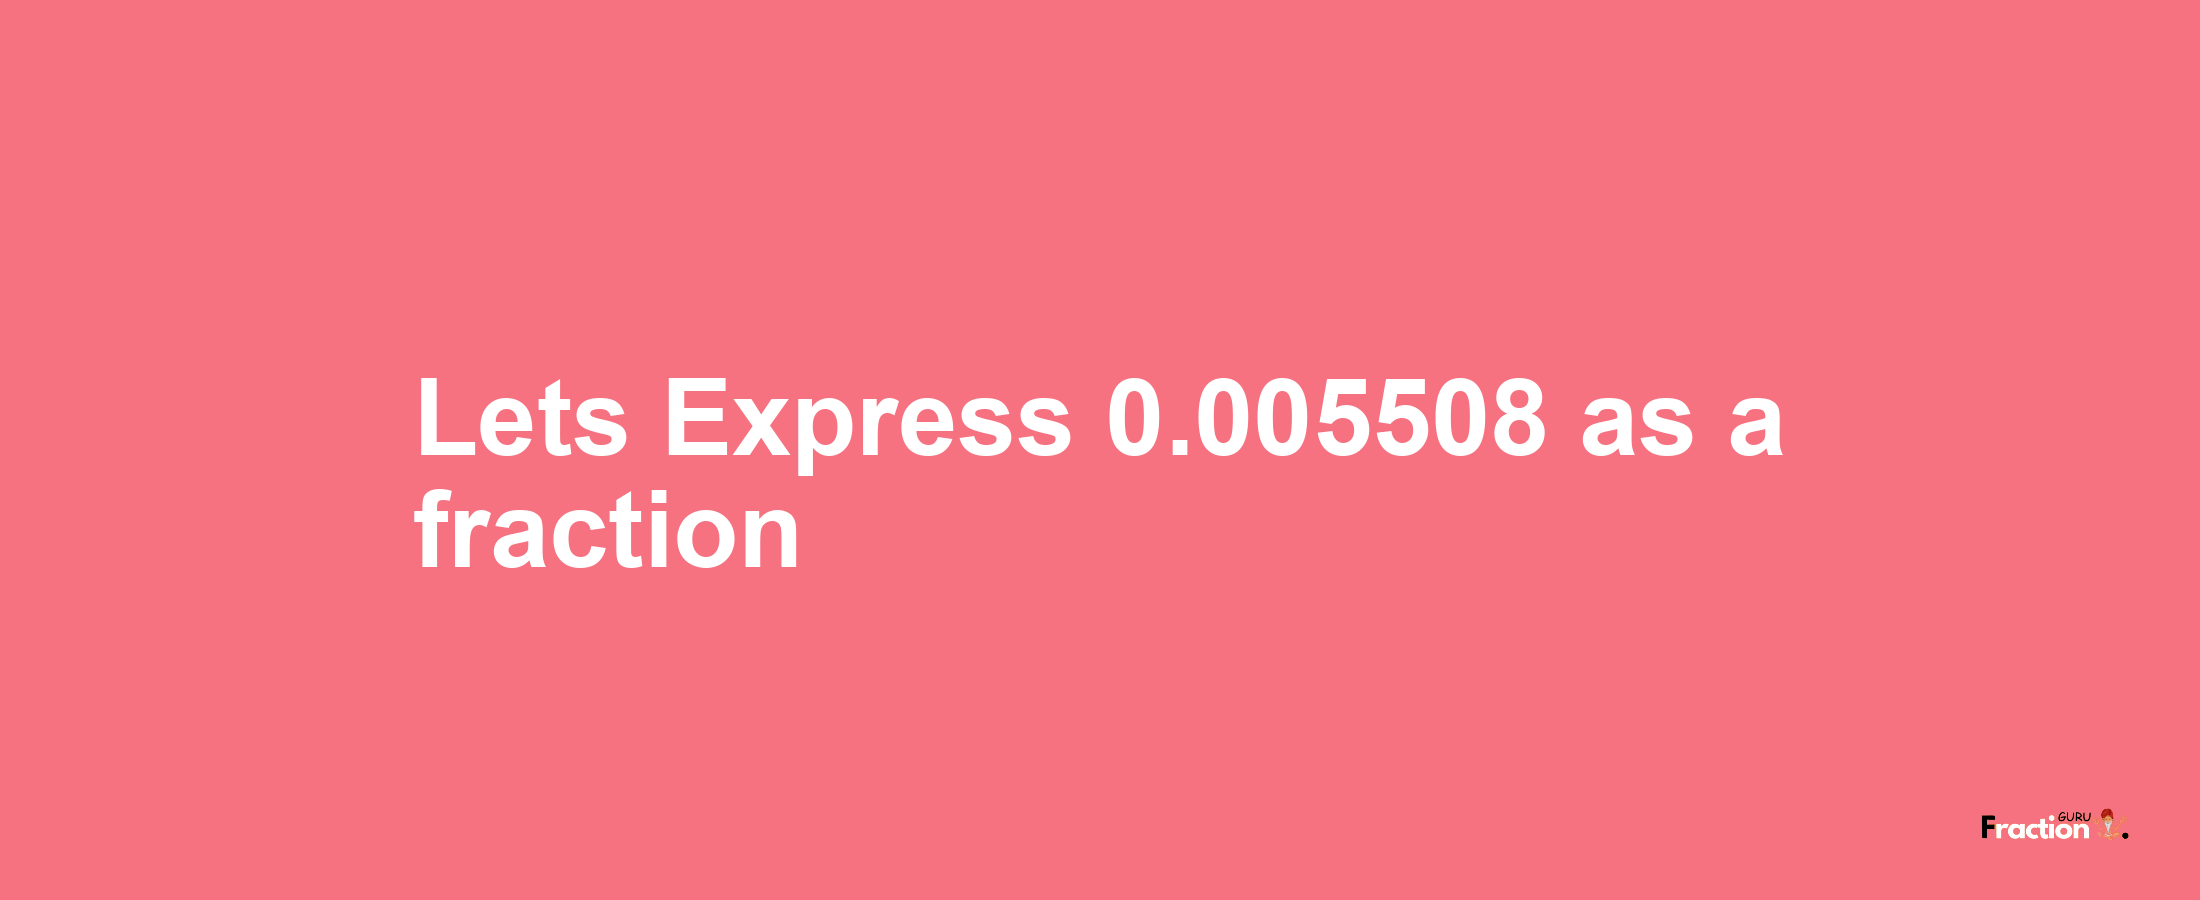 Lets Express 0.005508 as afraction